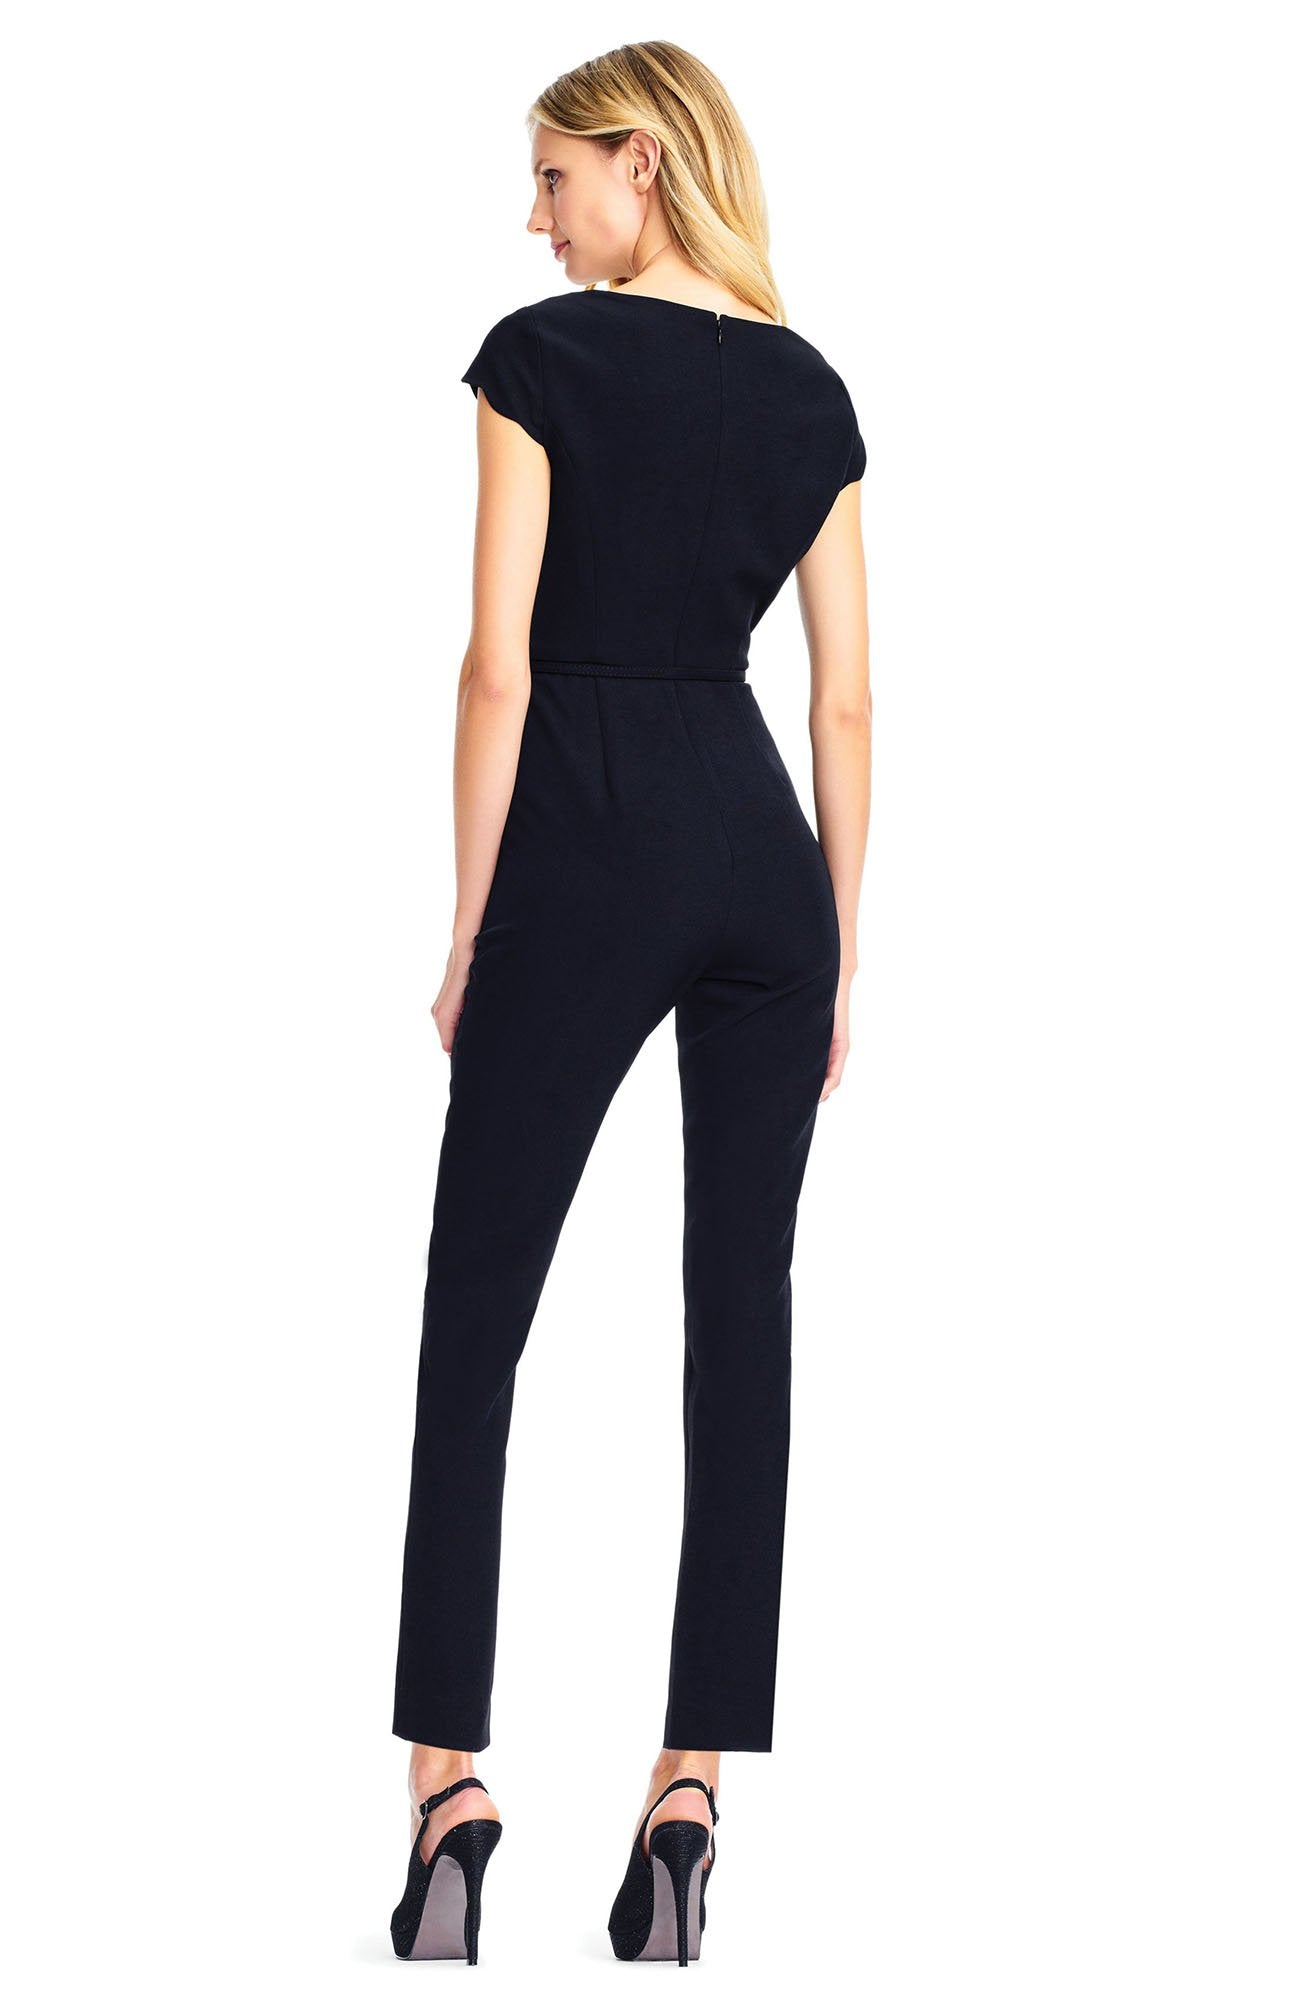 Adrianna Papell - AP1D101745 Fitted V-Neck Cap Sleeves Jumpsuit In Black